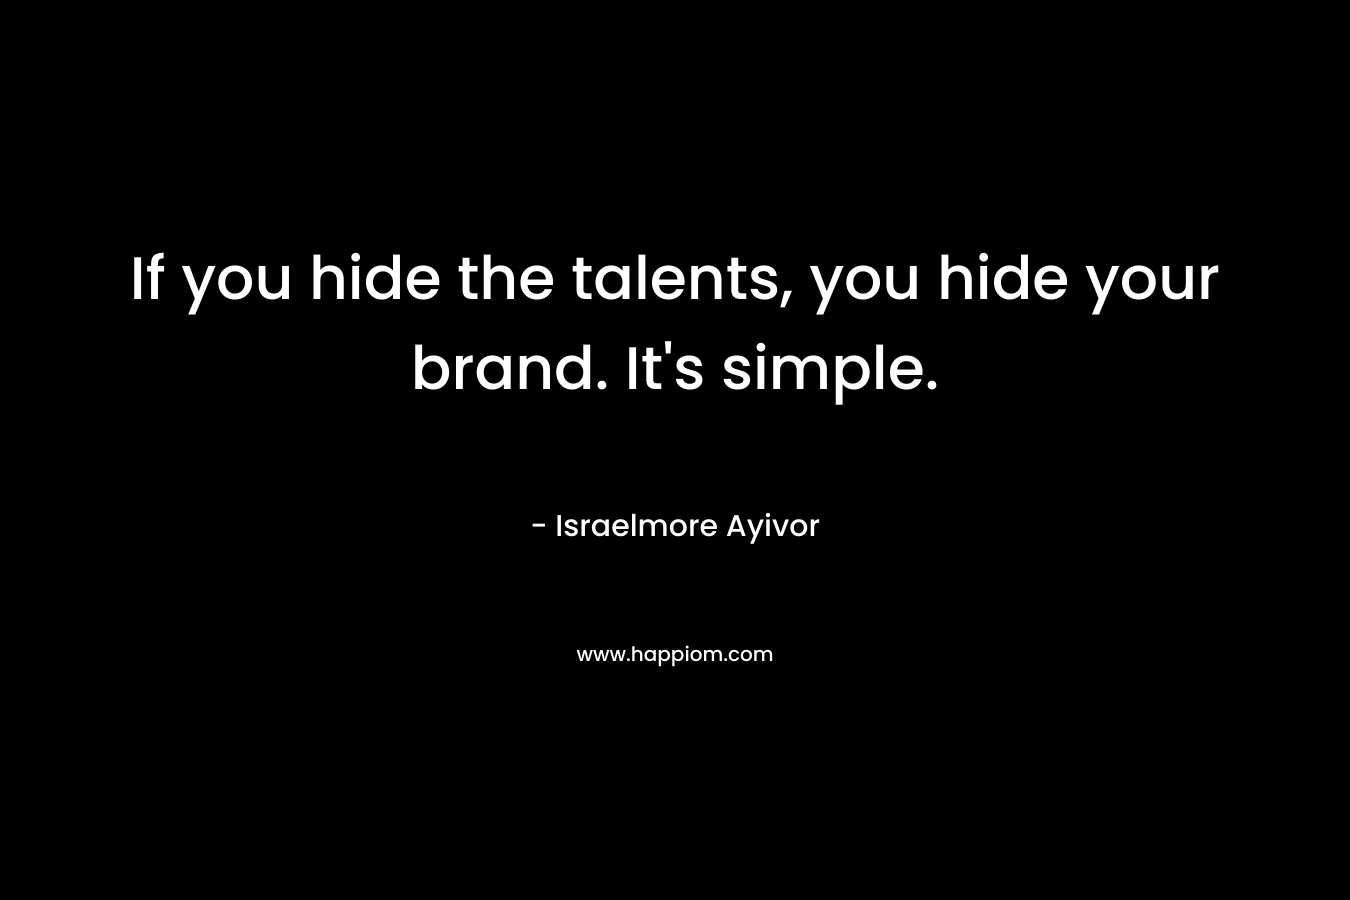 If you hide the talents, you hide your brand. It's simple.